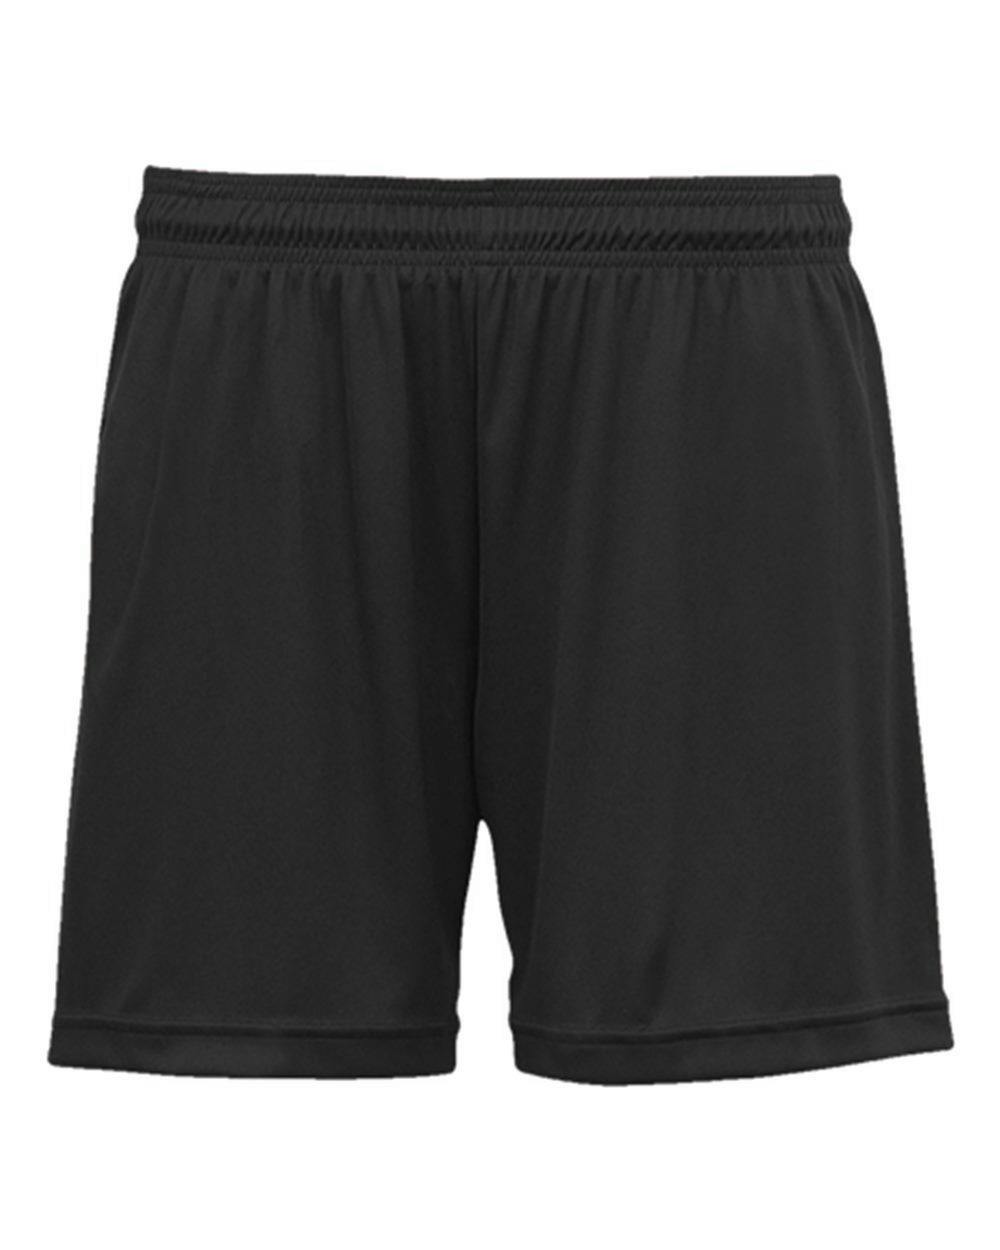 Image for Women's Performance Shorts - 5616